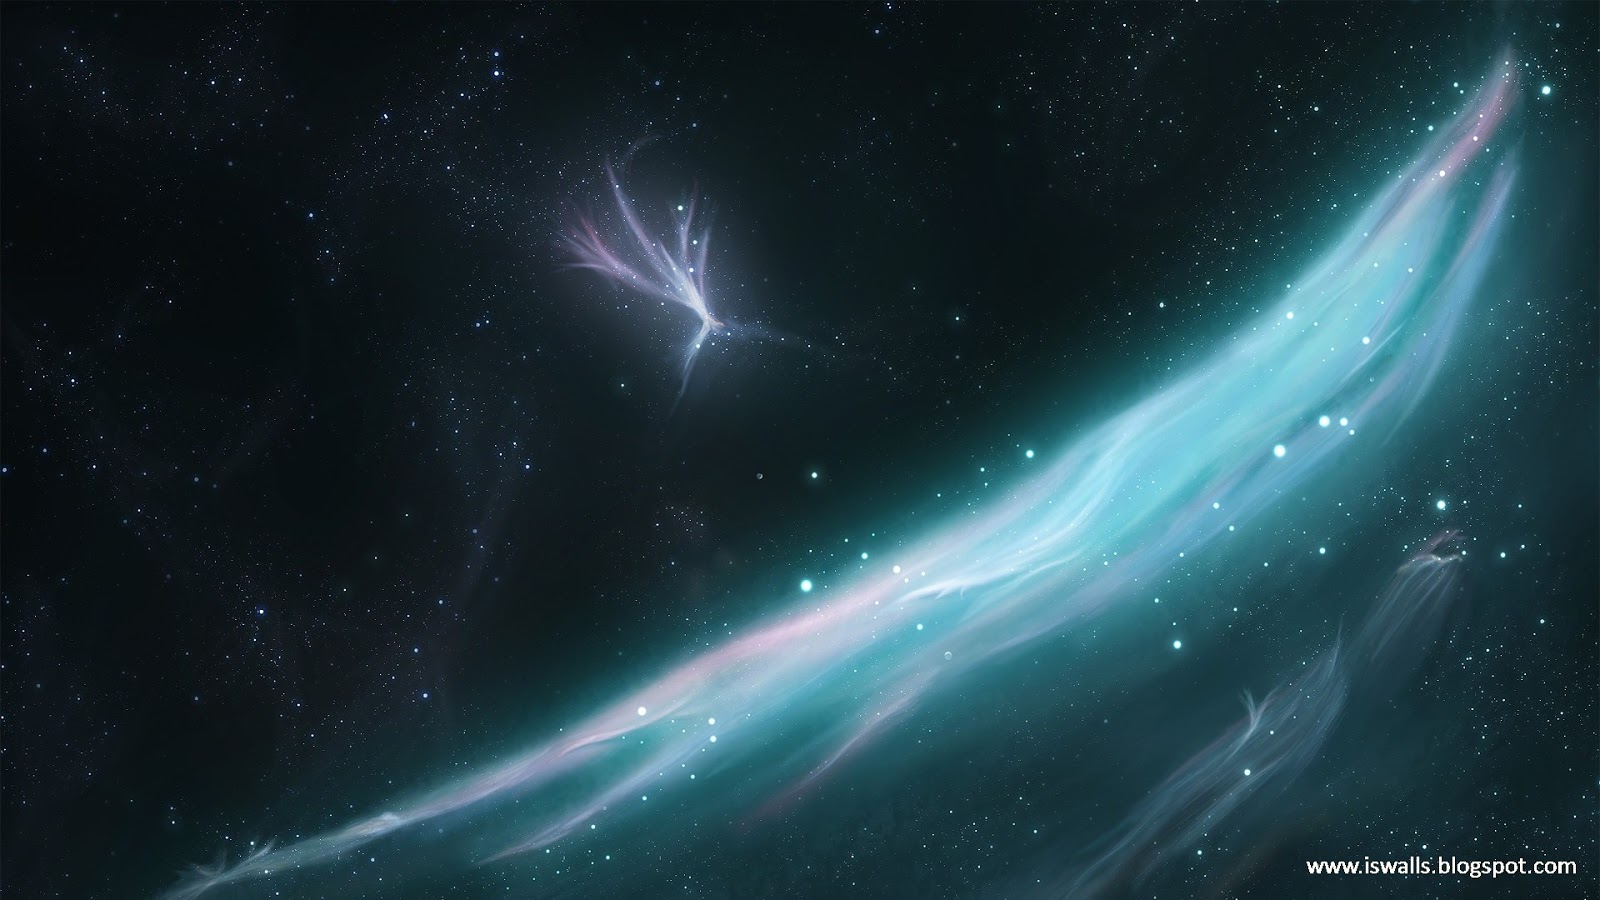 Animated Space Wallpaper Hd - 1600x900 Wallpaper 